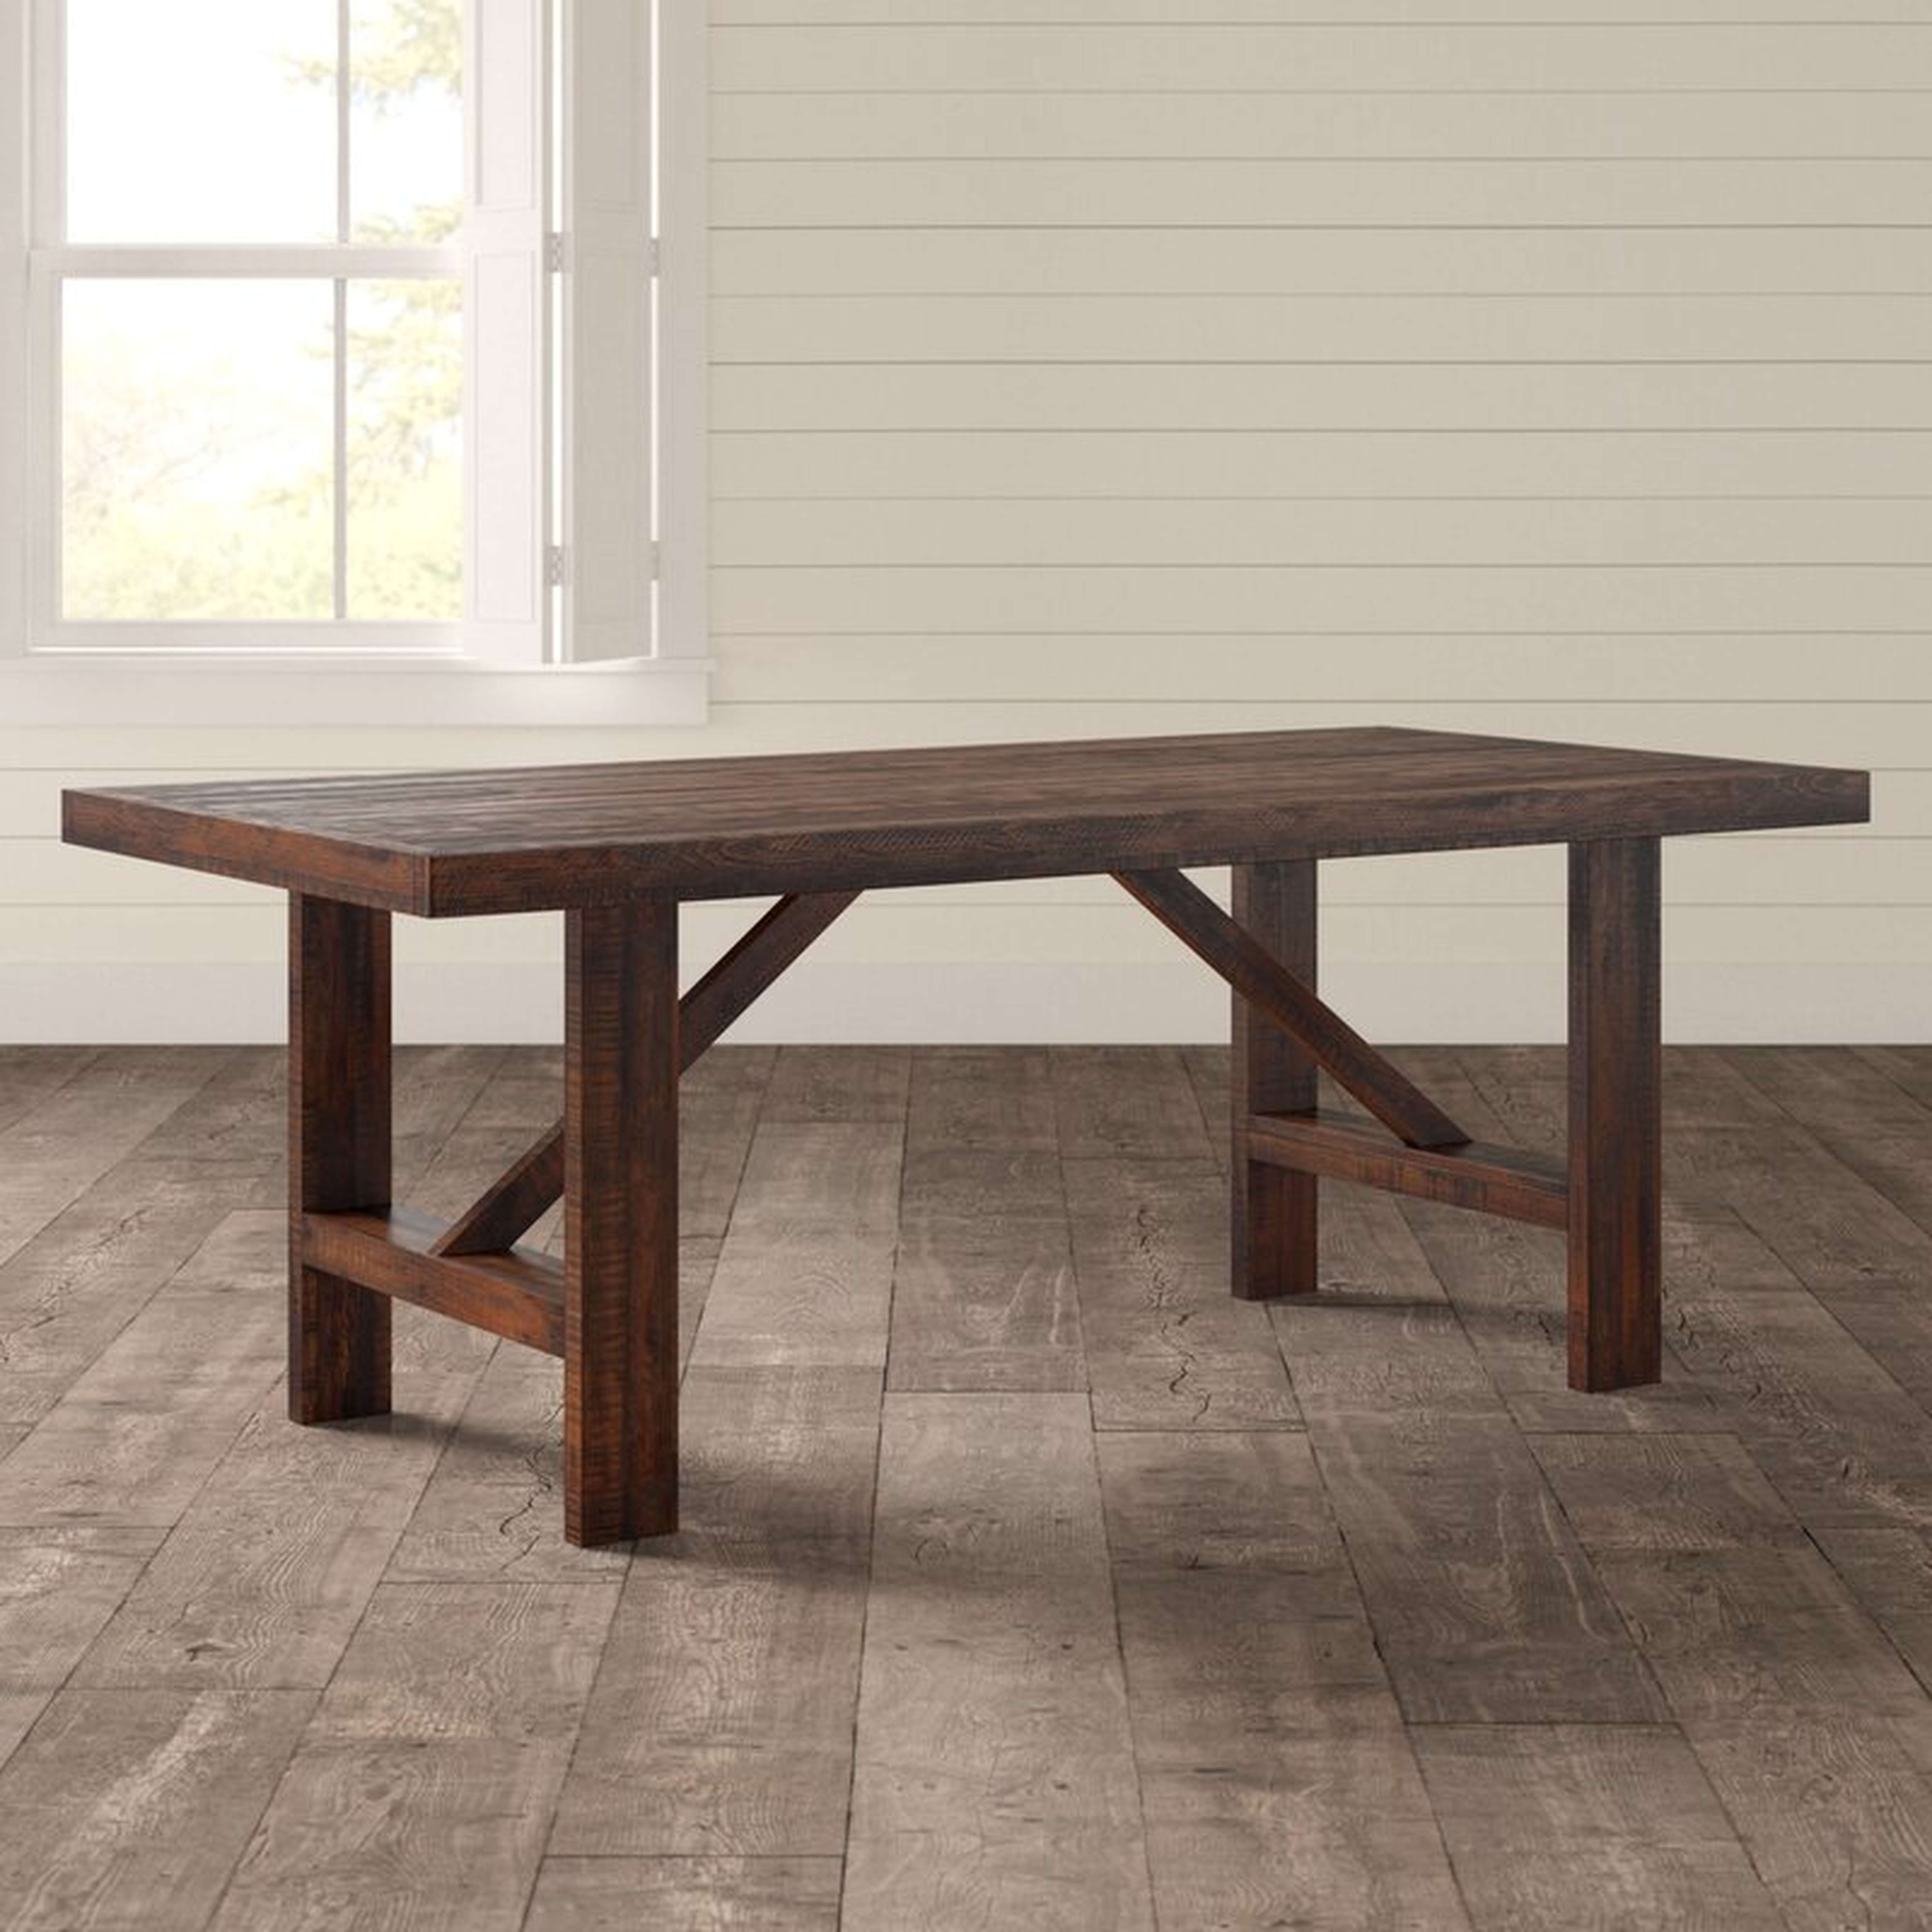 Hurley Acacia Solid Wood Dining Table - Birch Lane